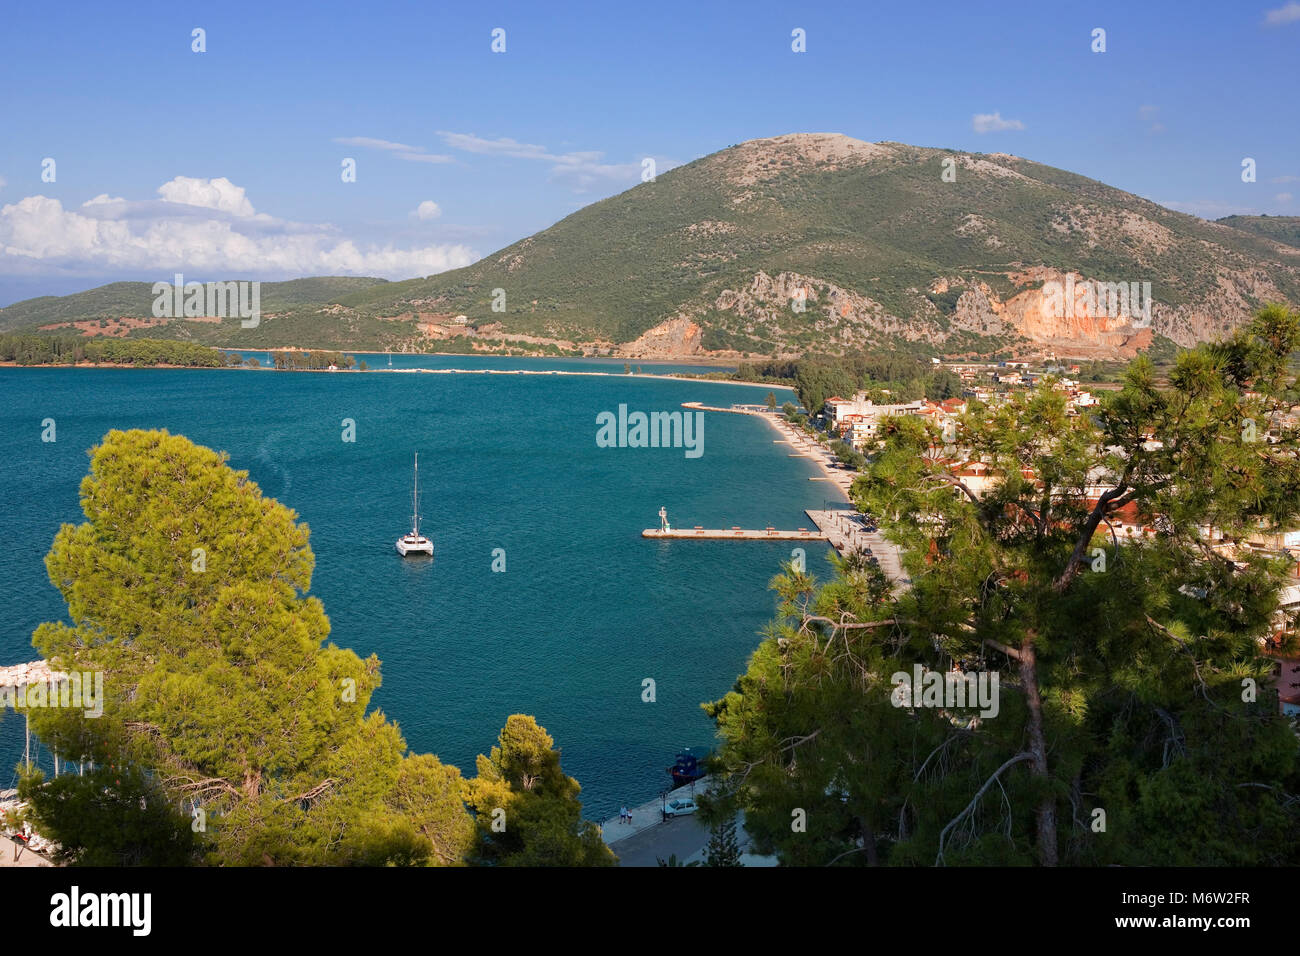 View from the Venetian fortress over Vonitsa, Ambracian Gulf, Greece Stock Photo